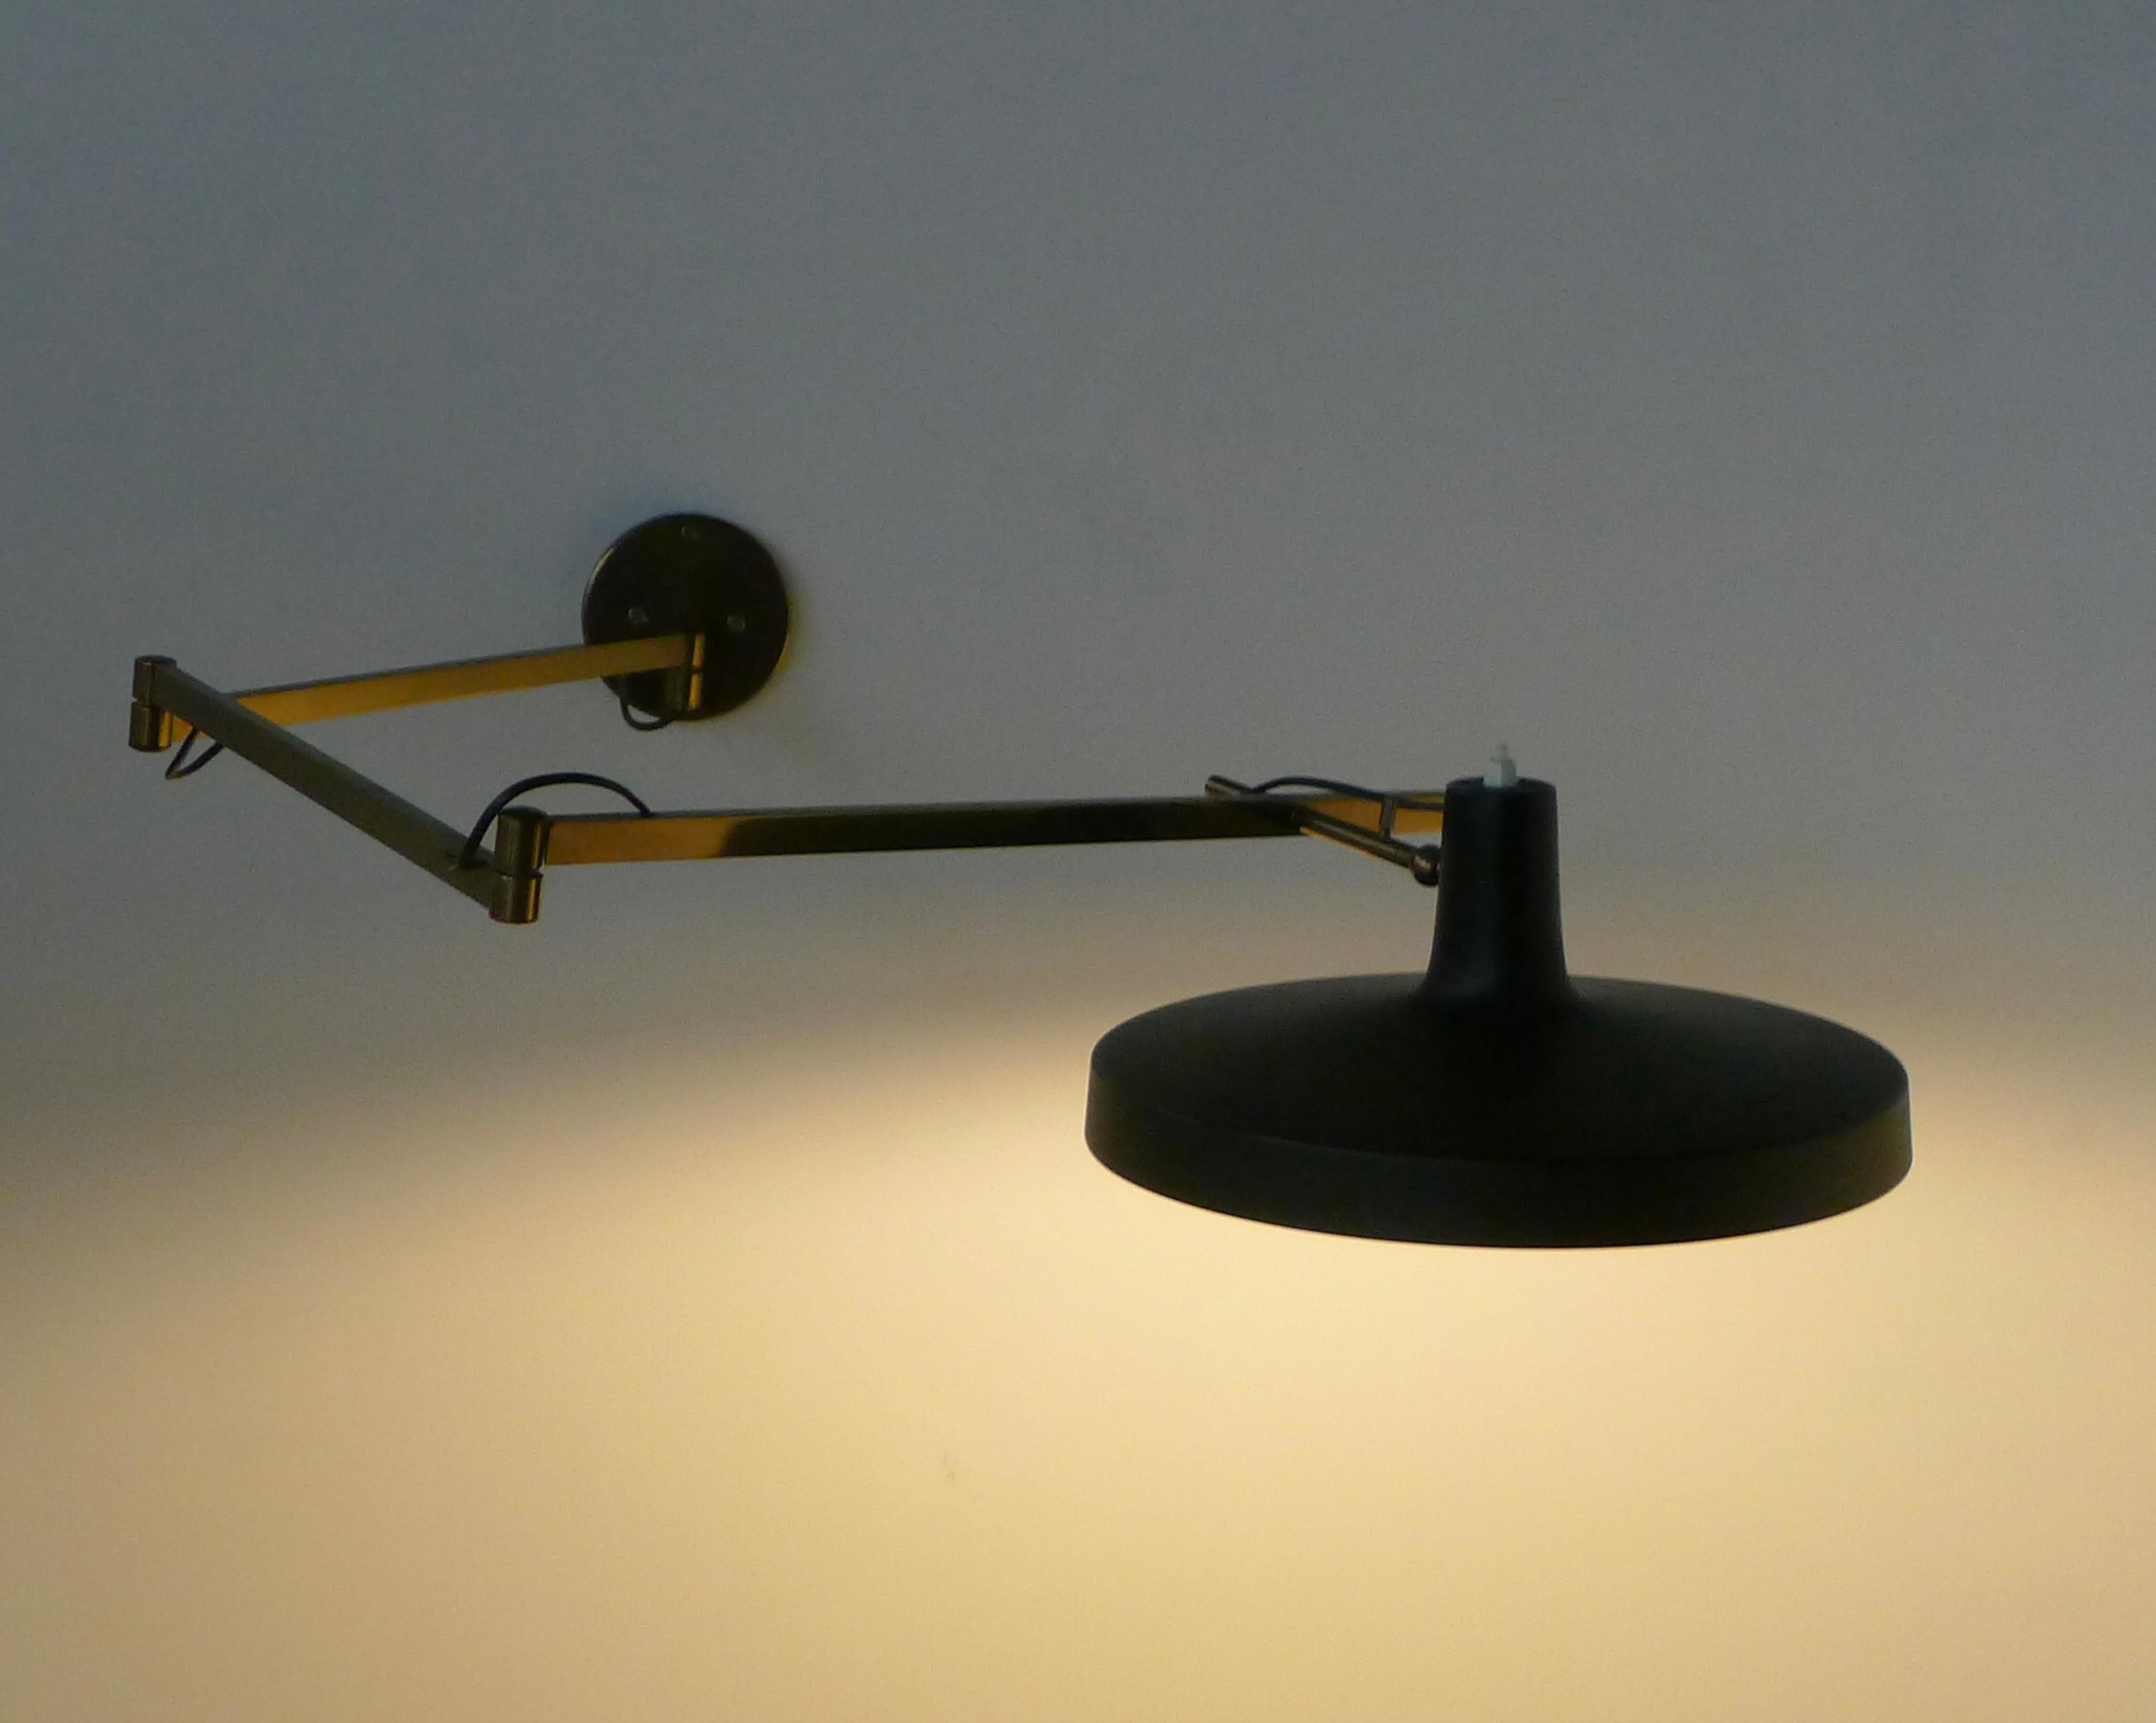 This is a very rare extendable wall light, Model 197, designed in 1953 by Gino Sarfatti and produced by Arteluce.  

Black lacquered aluminum diffuser on a brass adjustable arm.

Maximum extension 150cm, diffuser 35cm diameter.  

Bears original